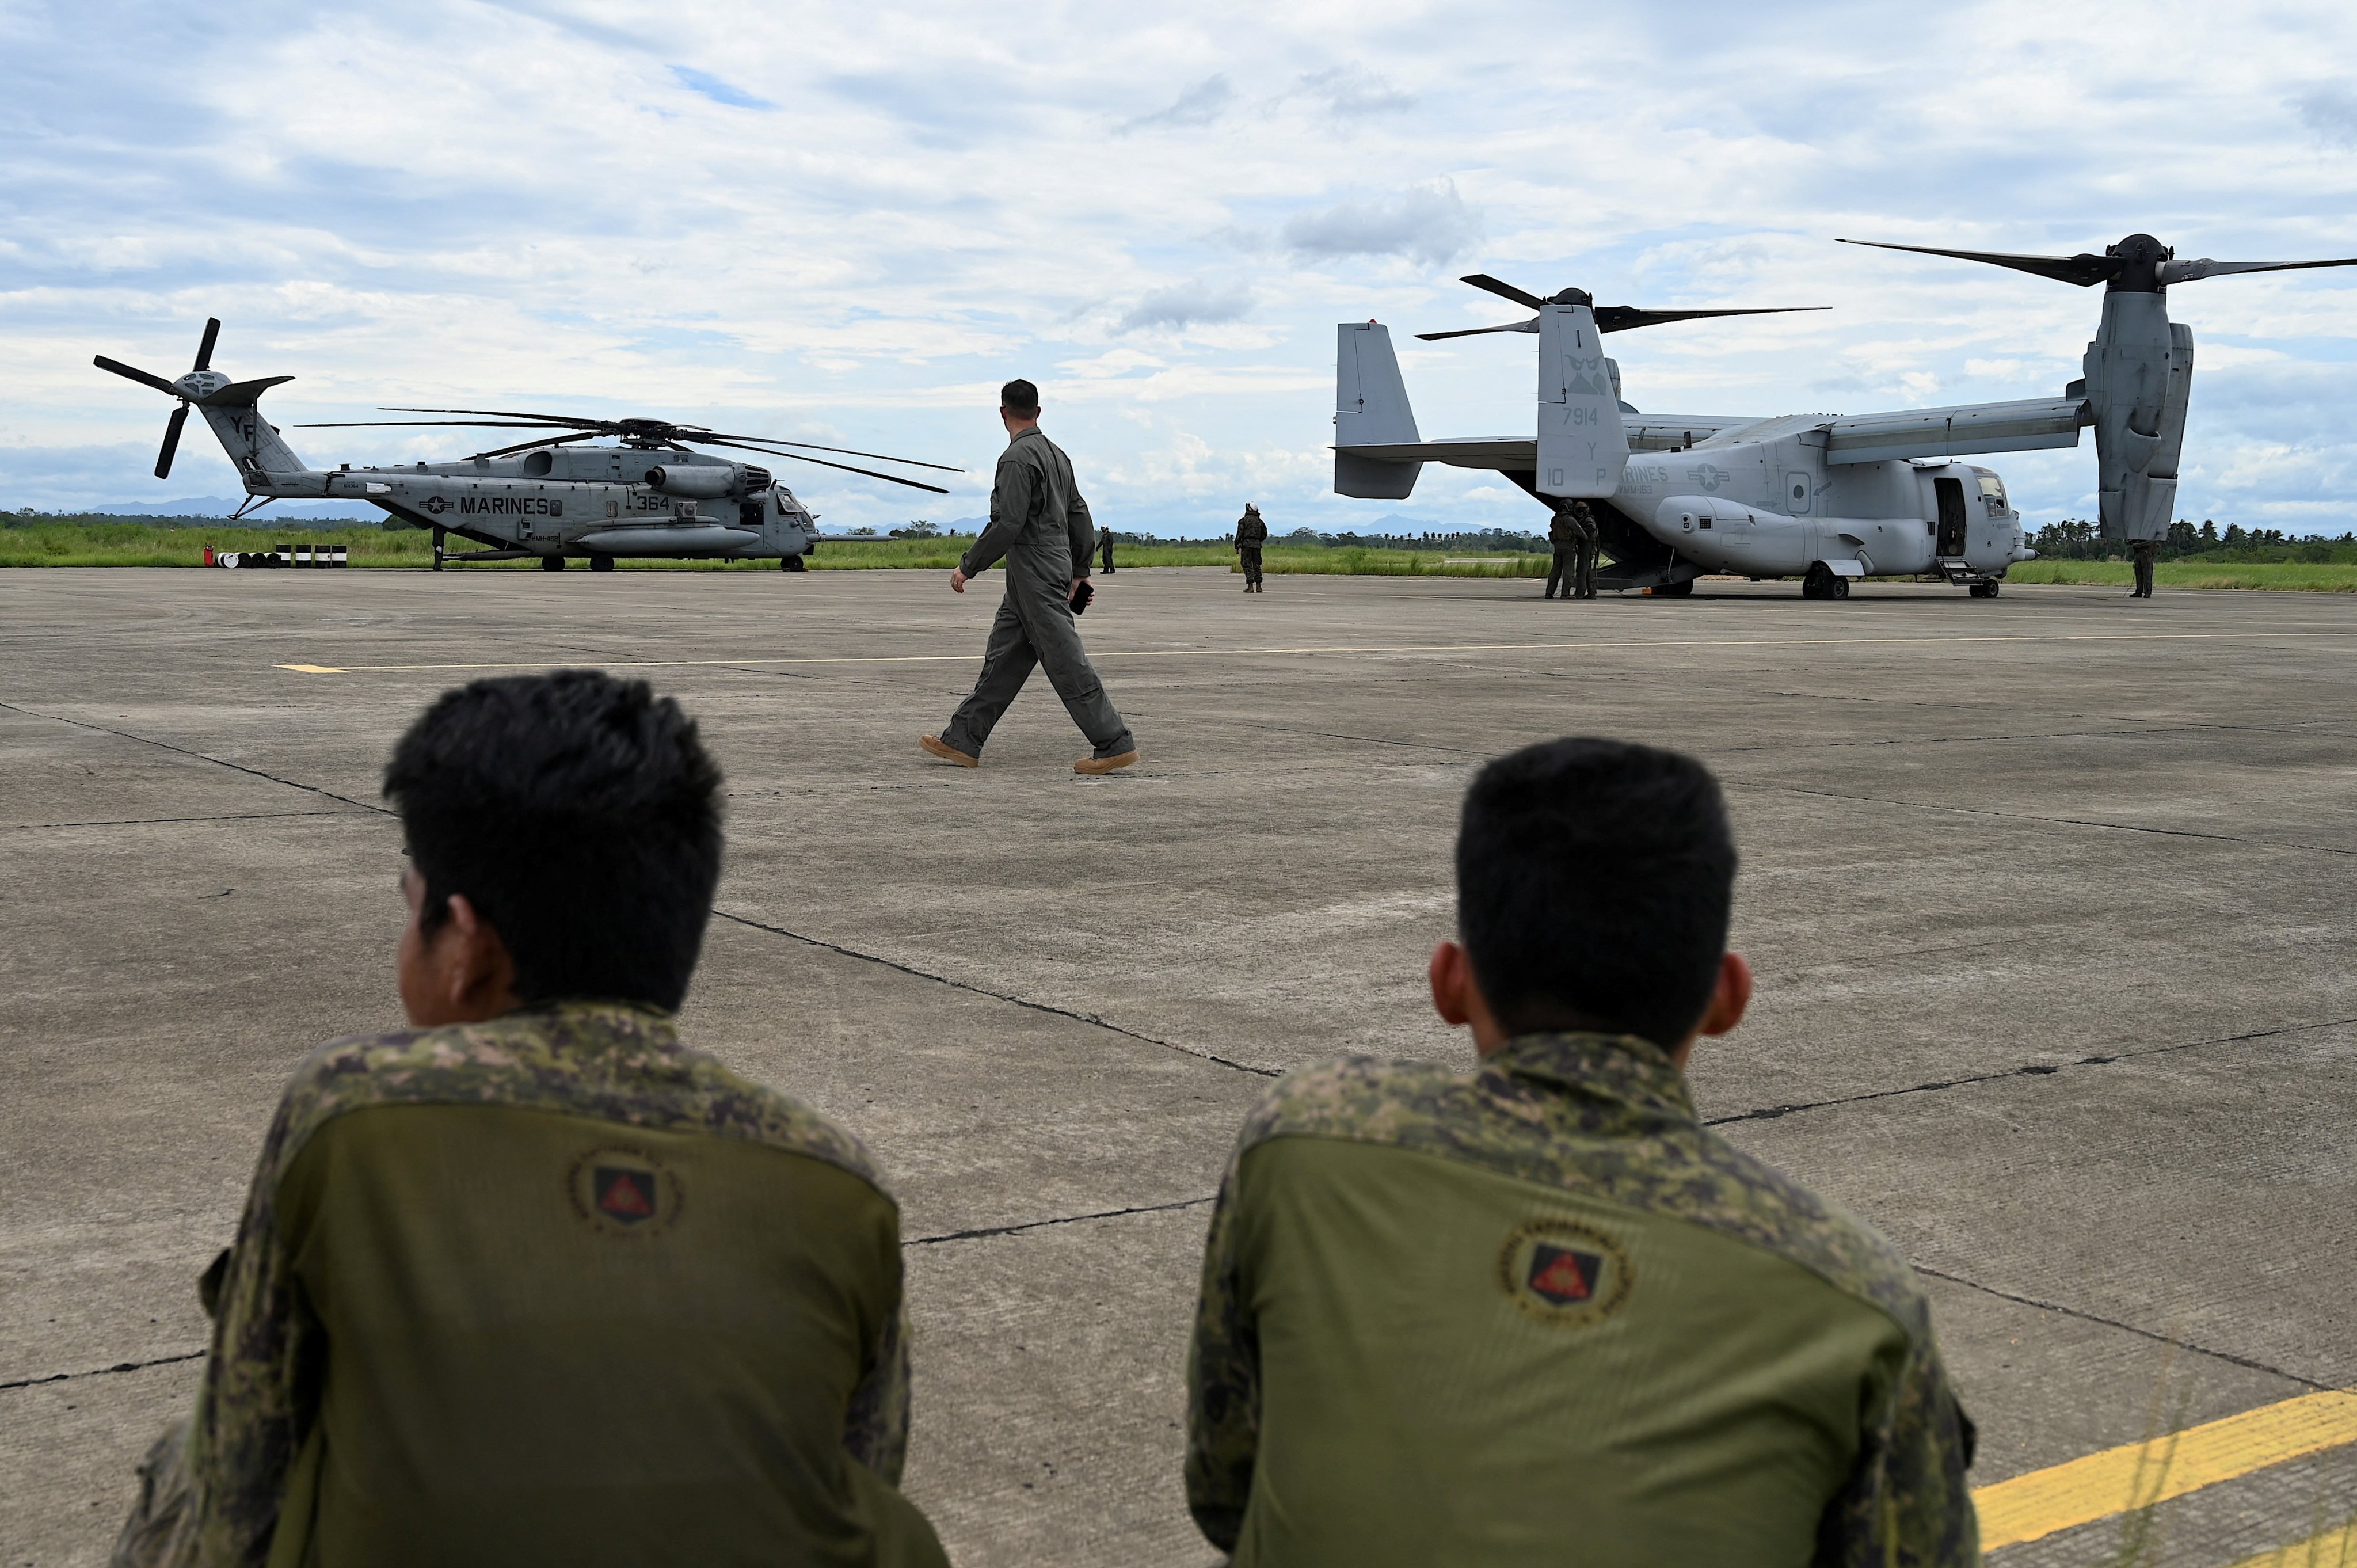 Soldiers watch US aircraft at Lal-lo Airport in Cagayan province, northern Philippines. Some Philippine lawmakers expressed alarm over the some 4,000 non-local students in the province that also houses military bases accessed by US troops. Photo: Reuters